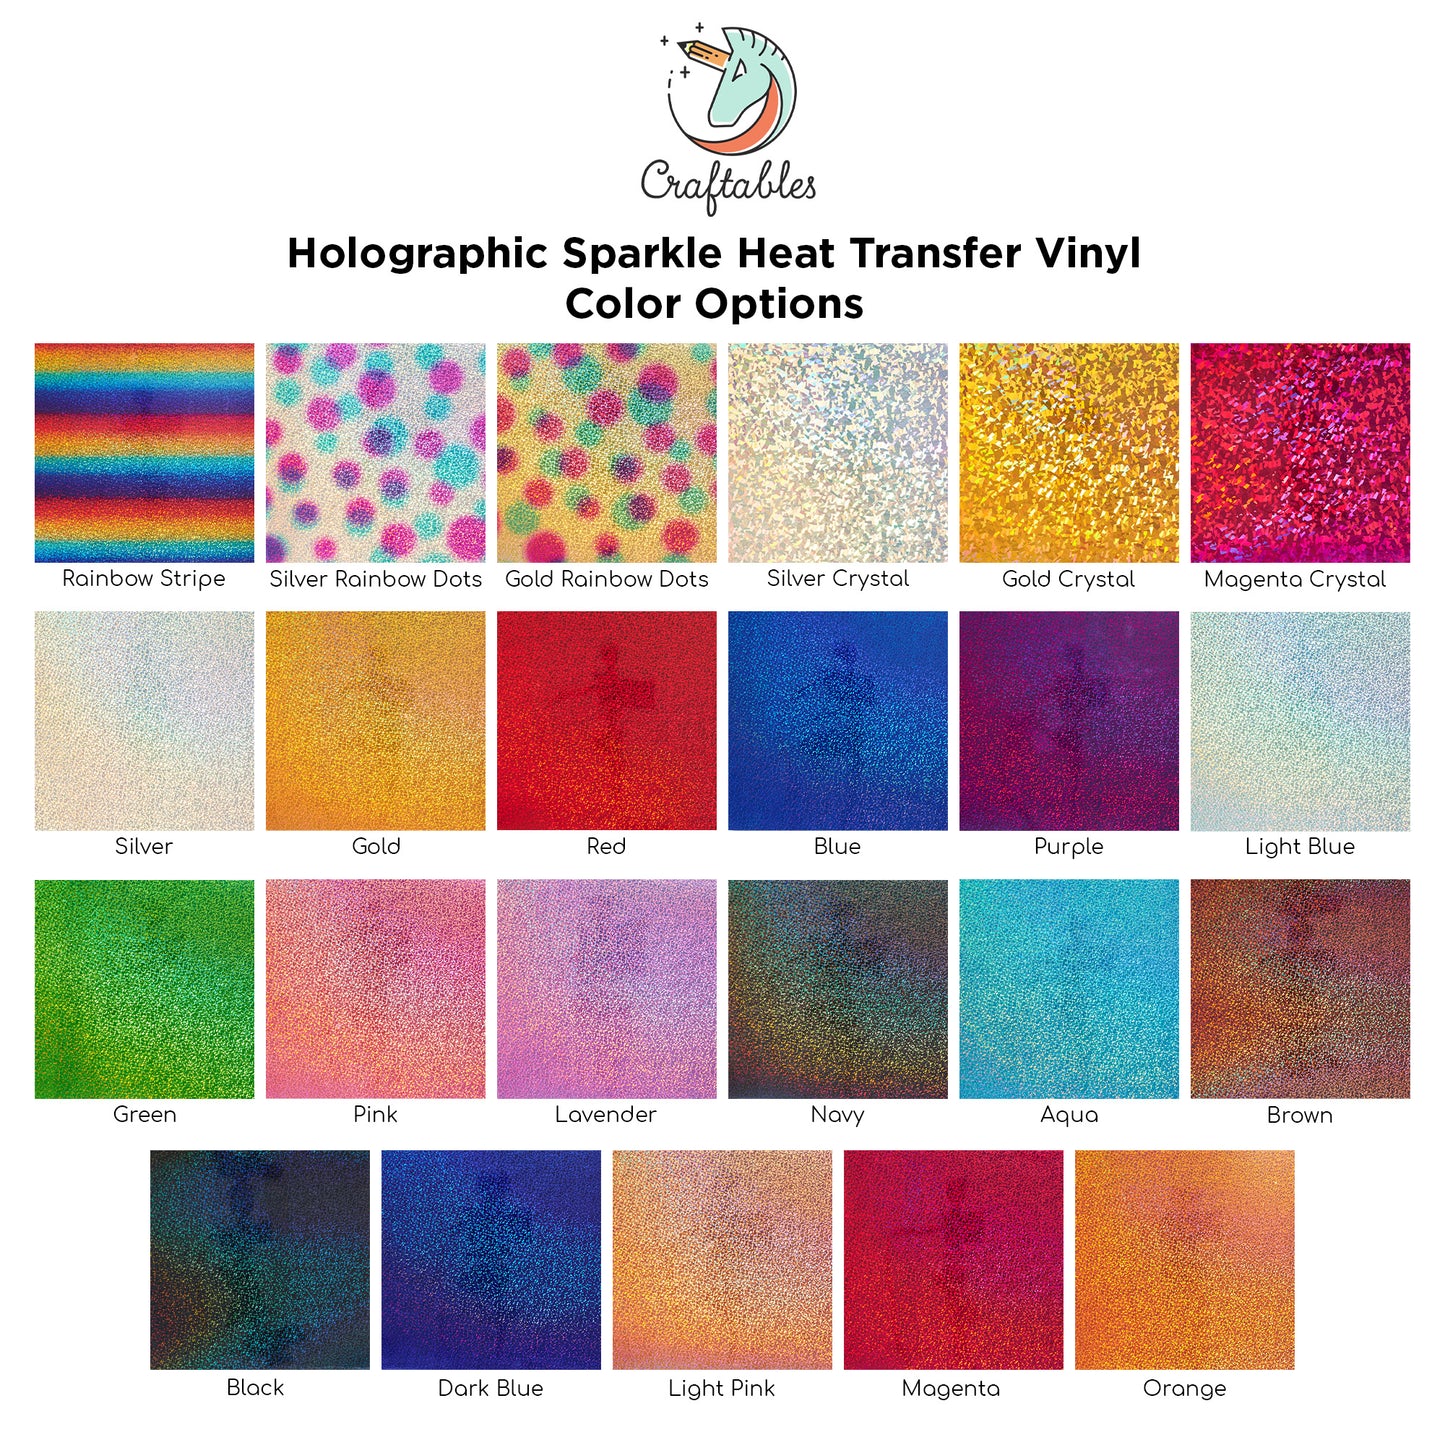 Lavender Holographic Sparkle Heat Transfer Vinyl Sheets By Craftables